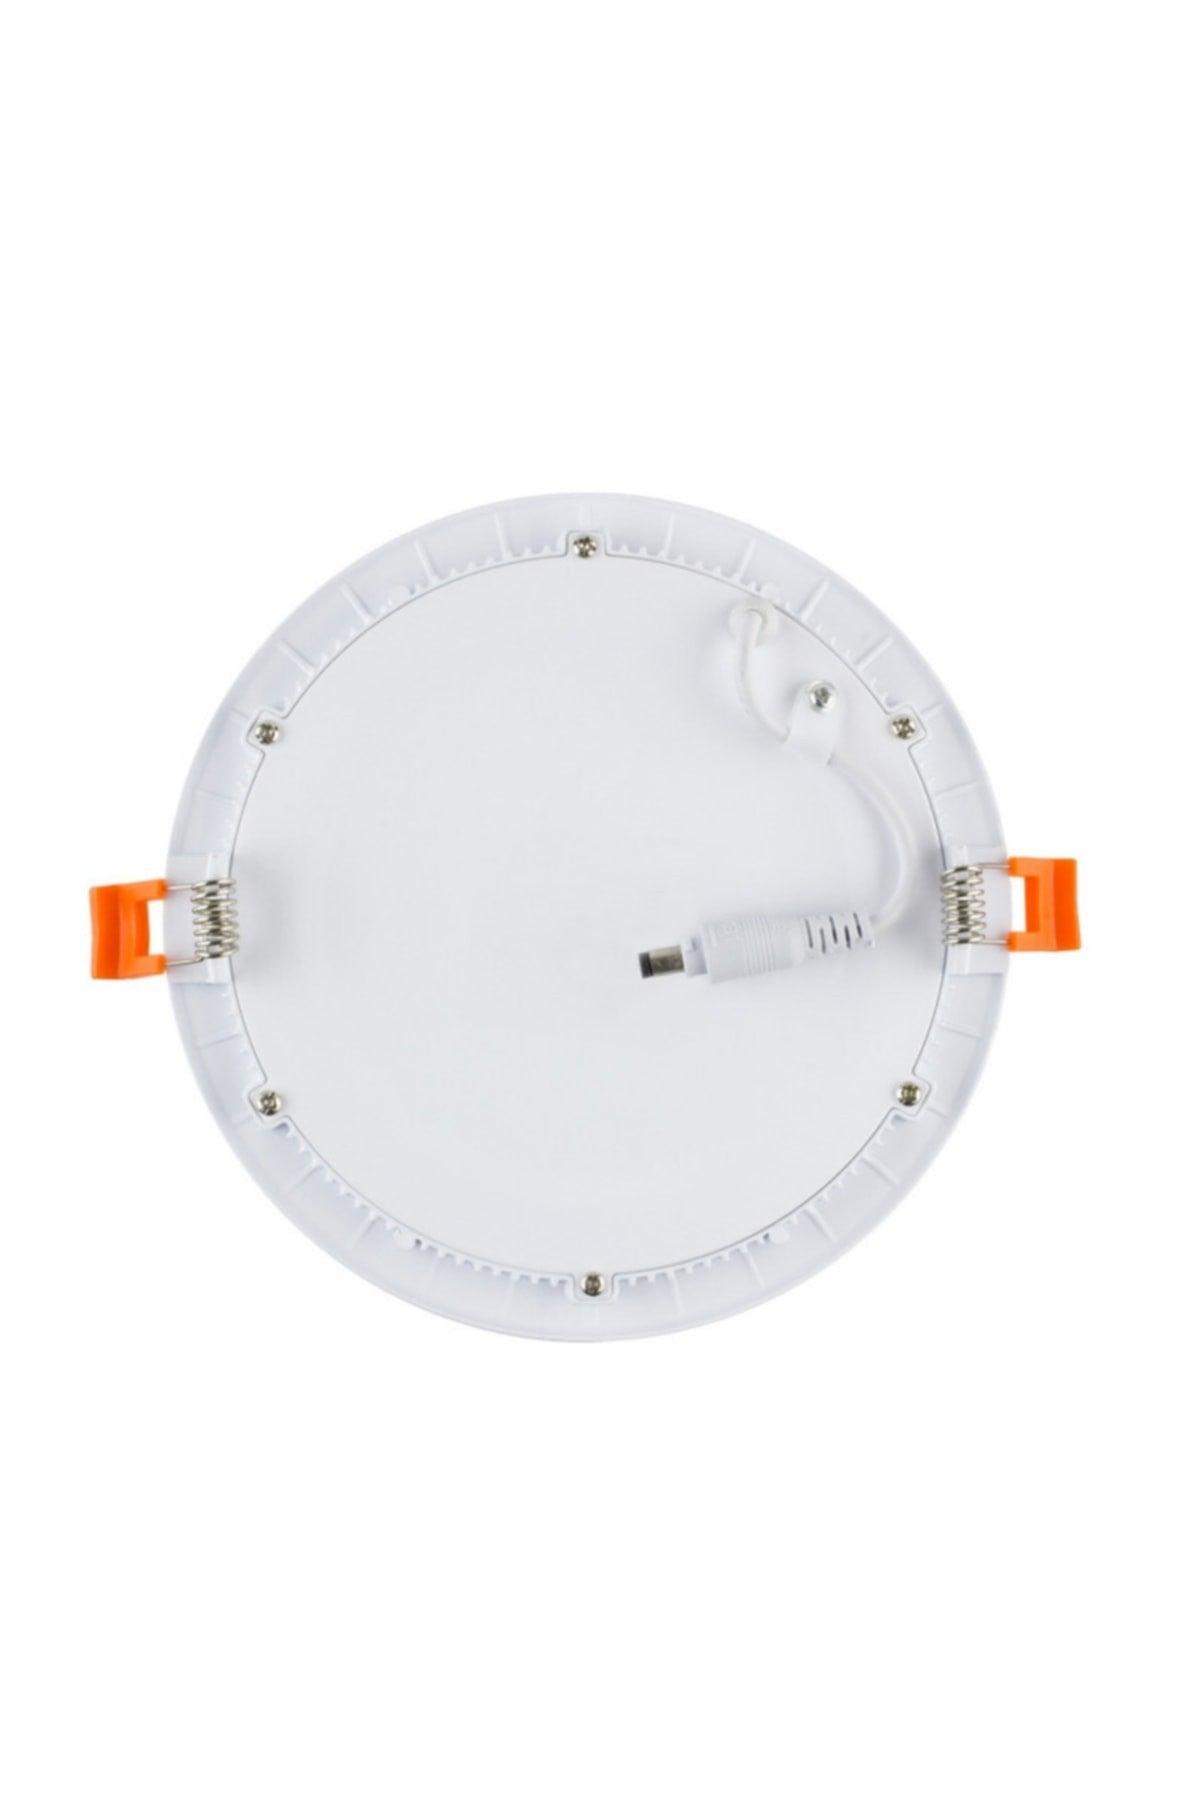 9w Recessed Led Panel Deluxe White (10pcs)